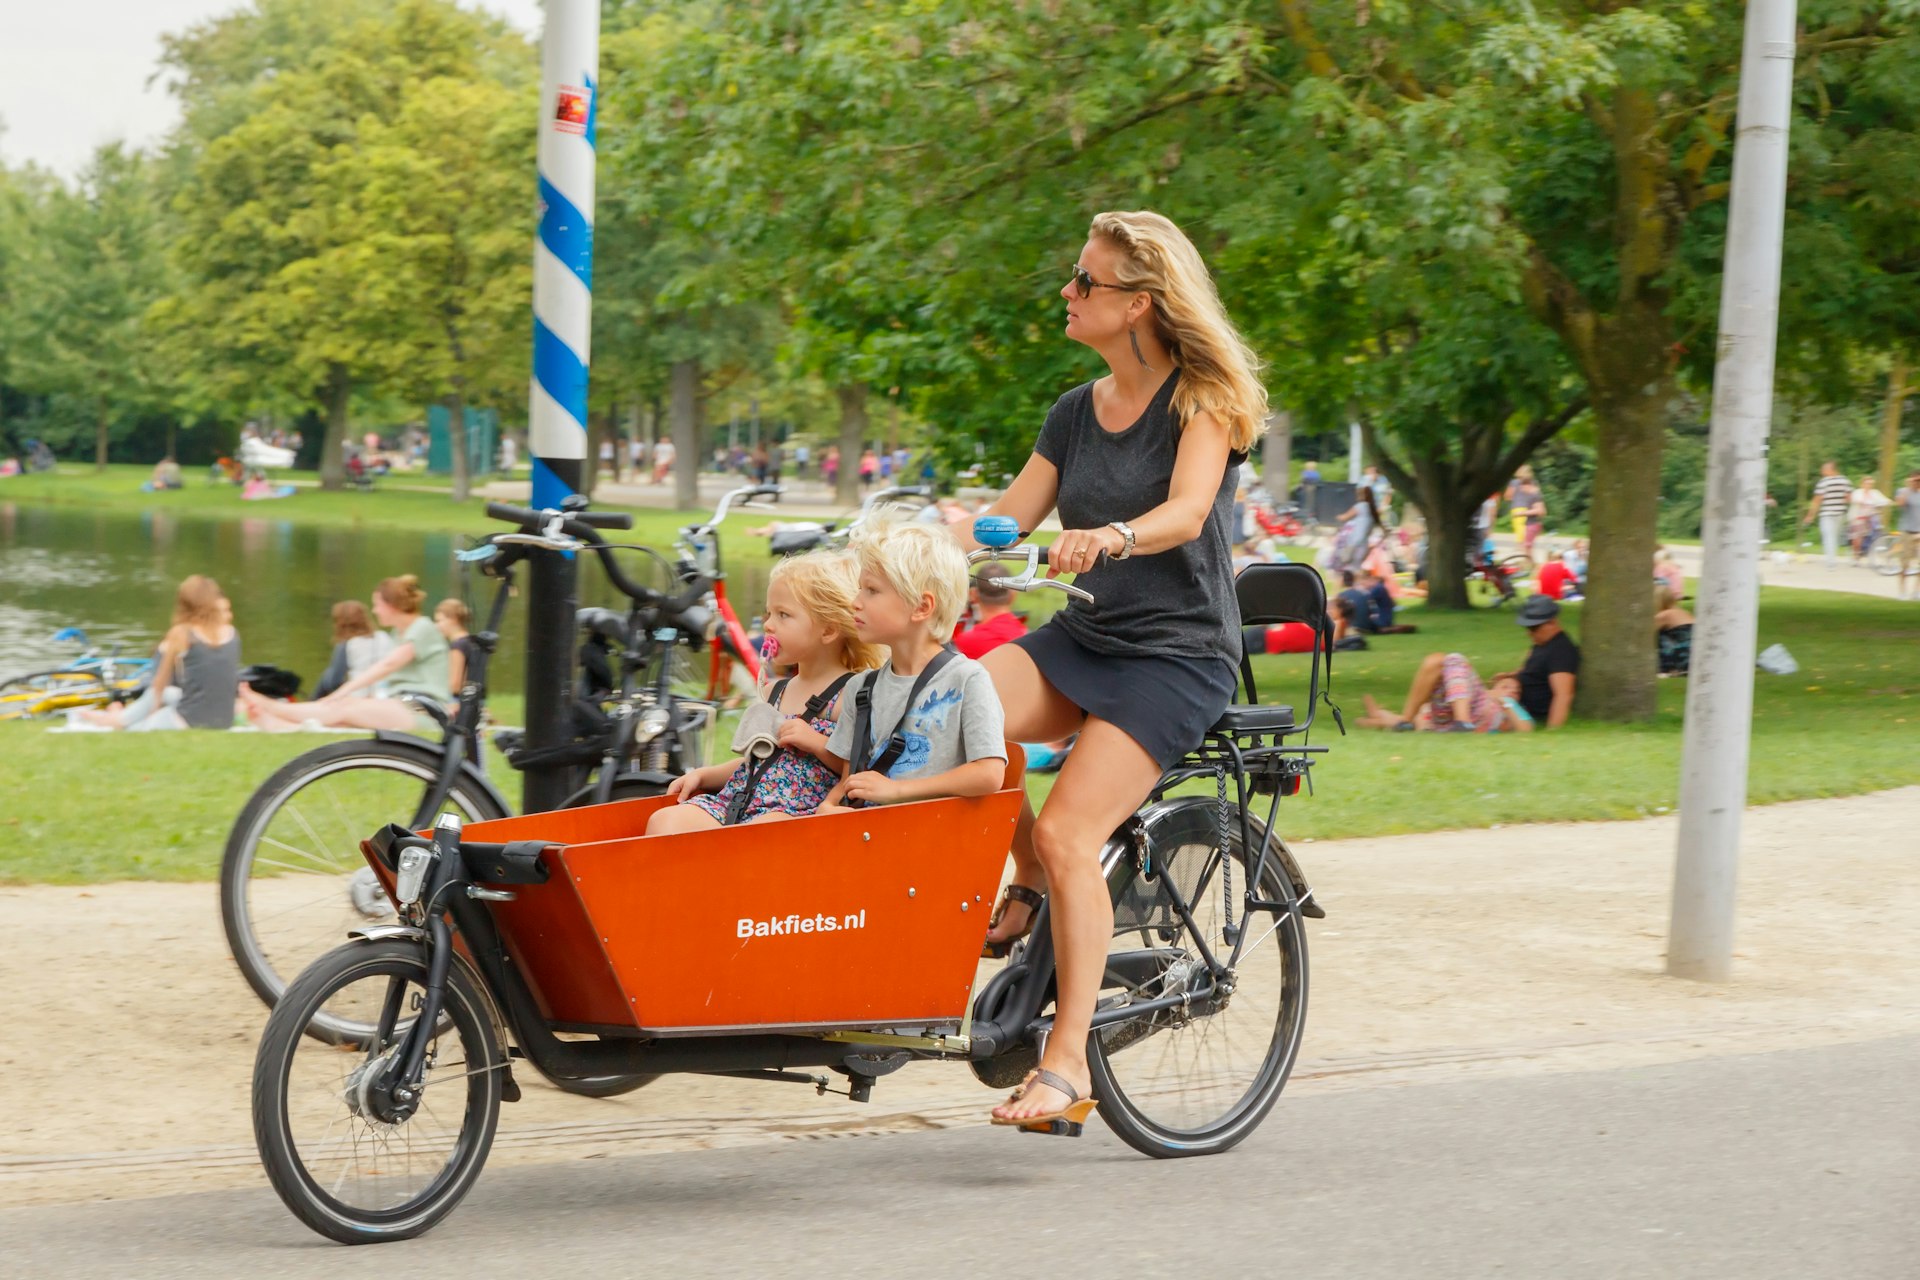 Cargo bike bicyclists - woman with children - in Amsterdam.